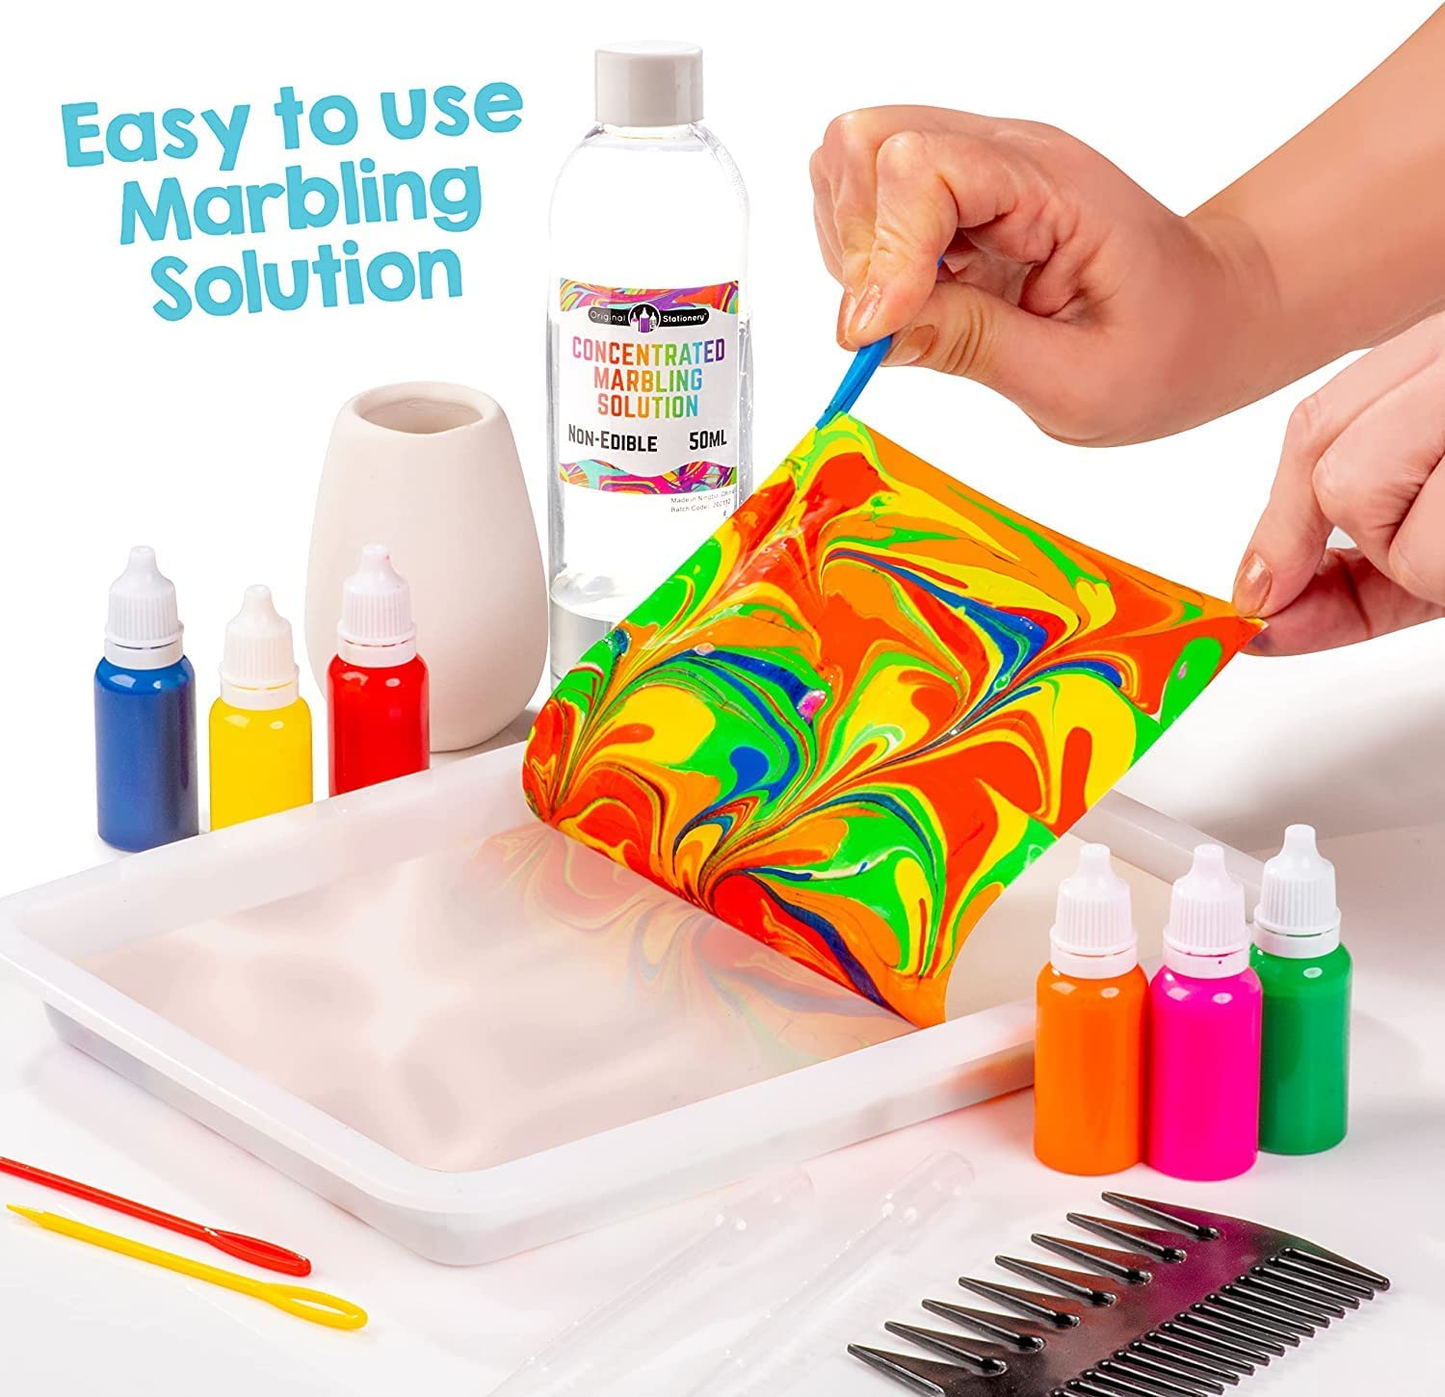 Original Stationery Rainbow Marbling Kit, Everything You Need in One Marble Painting Kit Kids to Make Marble Art and Craft Kids Will Love, Great Arts and Crafts for Girls and Rainbow Gifts for Girls